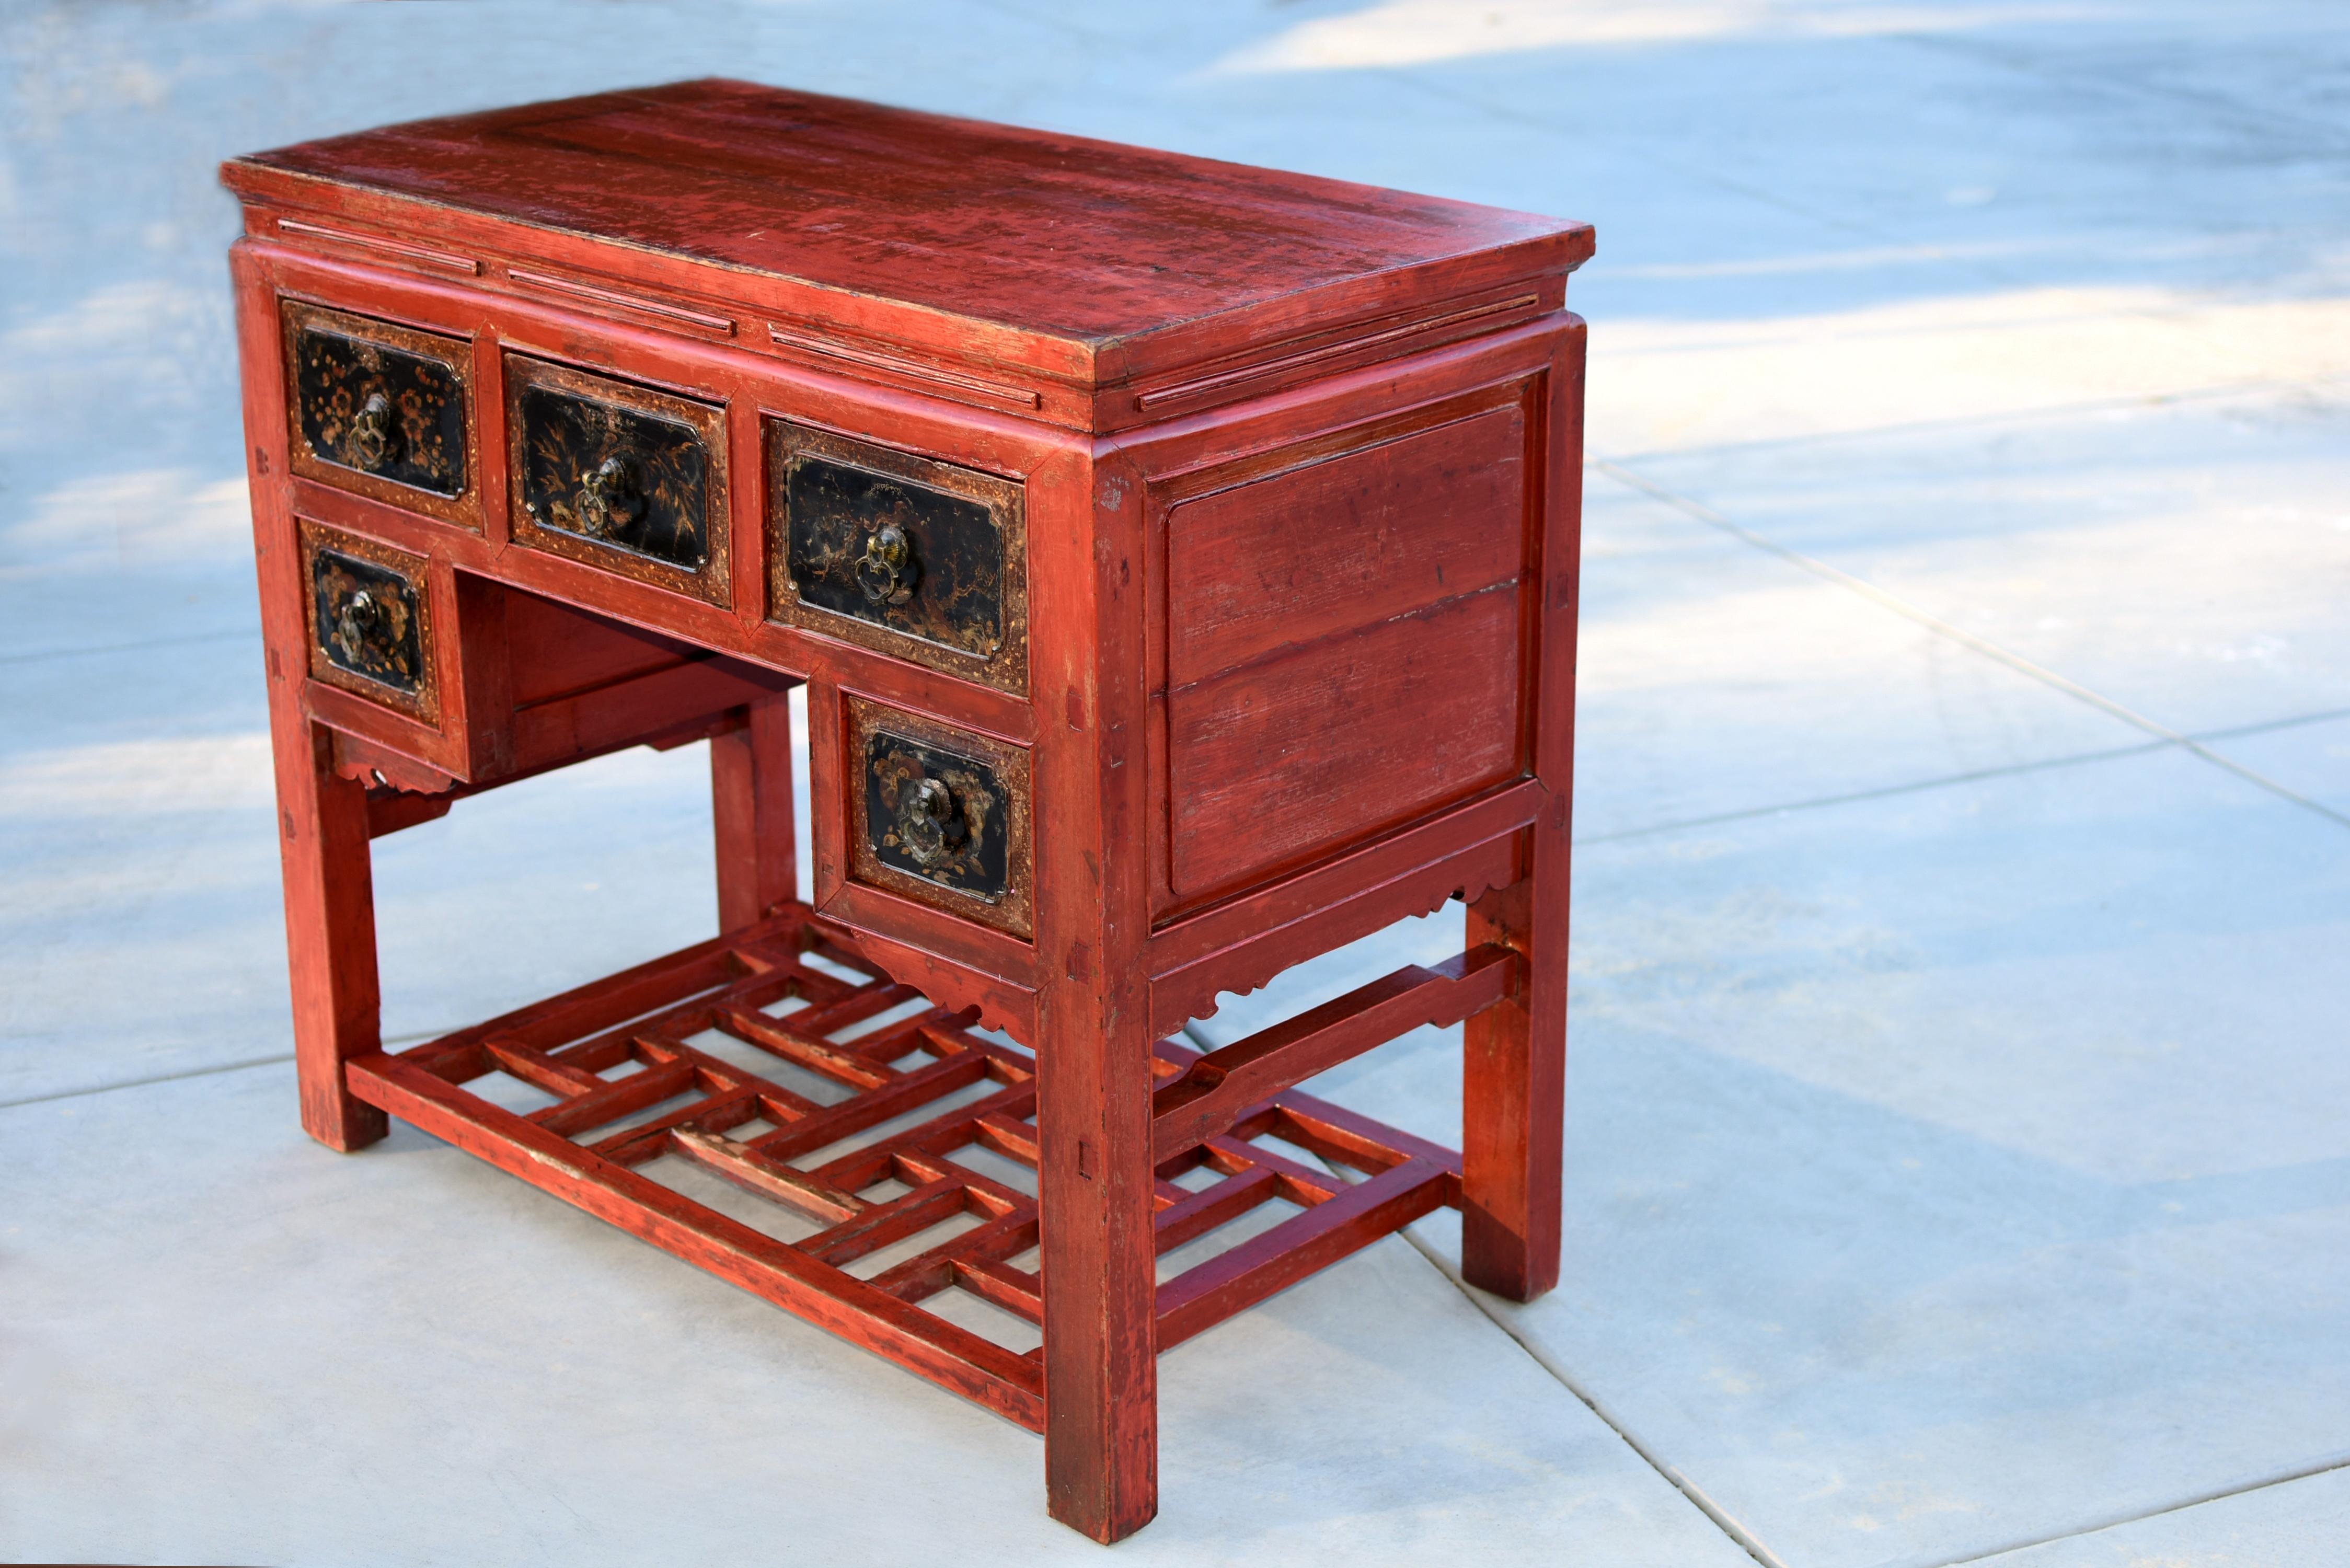 The 19th-century red lacquered solid wood Chinese table from Fujian province is a remarkable piece of late Qing dynasty craftsmanship. Solid single-board top is strong and stable, continuing down to a narrow waist with open light slits before